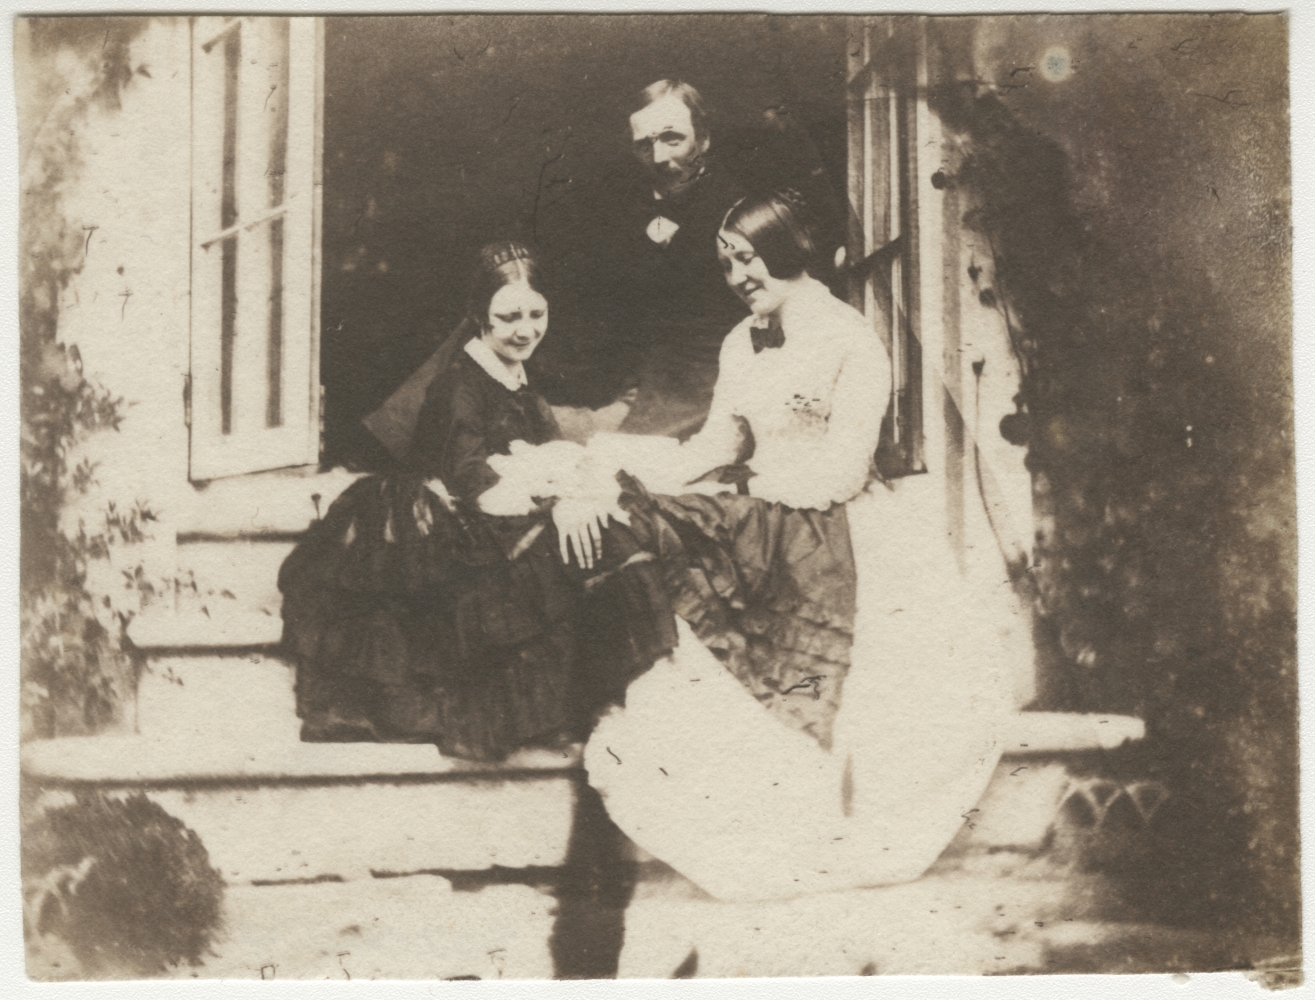 Rev. Calvert Richard JONES (Welsh, 1802-1877) Two ladies and a gentleman, seated on steps, likely at Veranda, early 1850s Salt print from a glass negative 7.6 x  x 10.2 cm